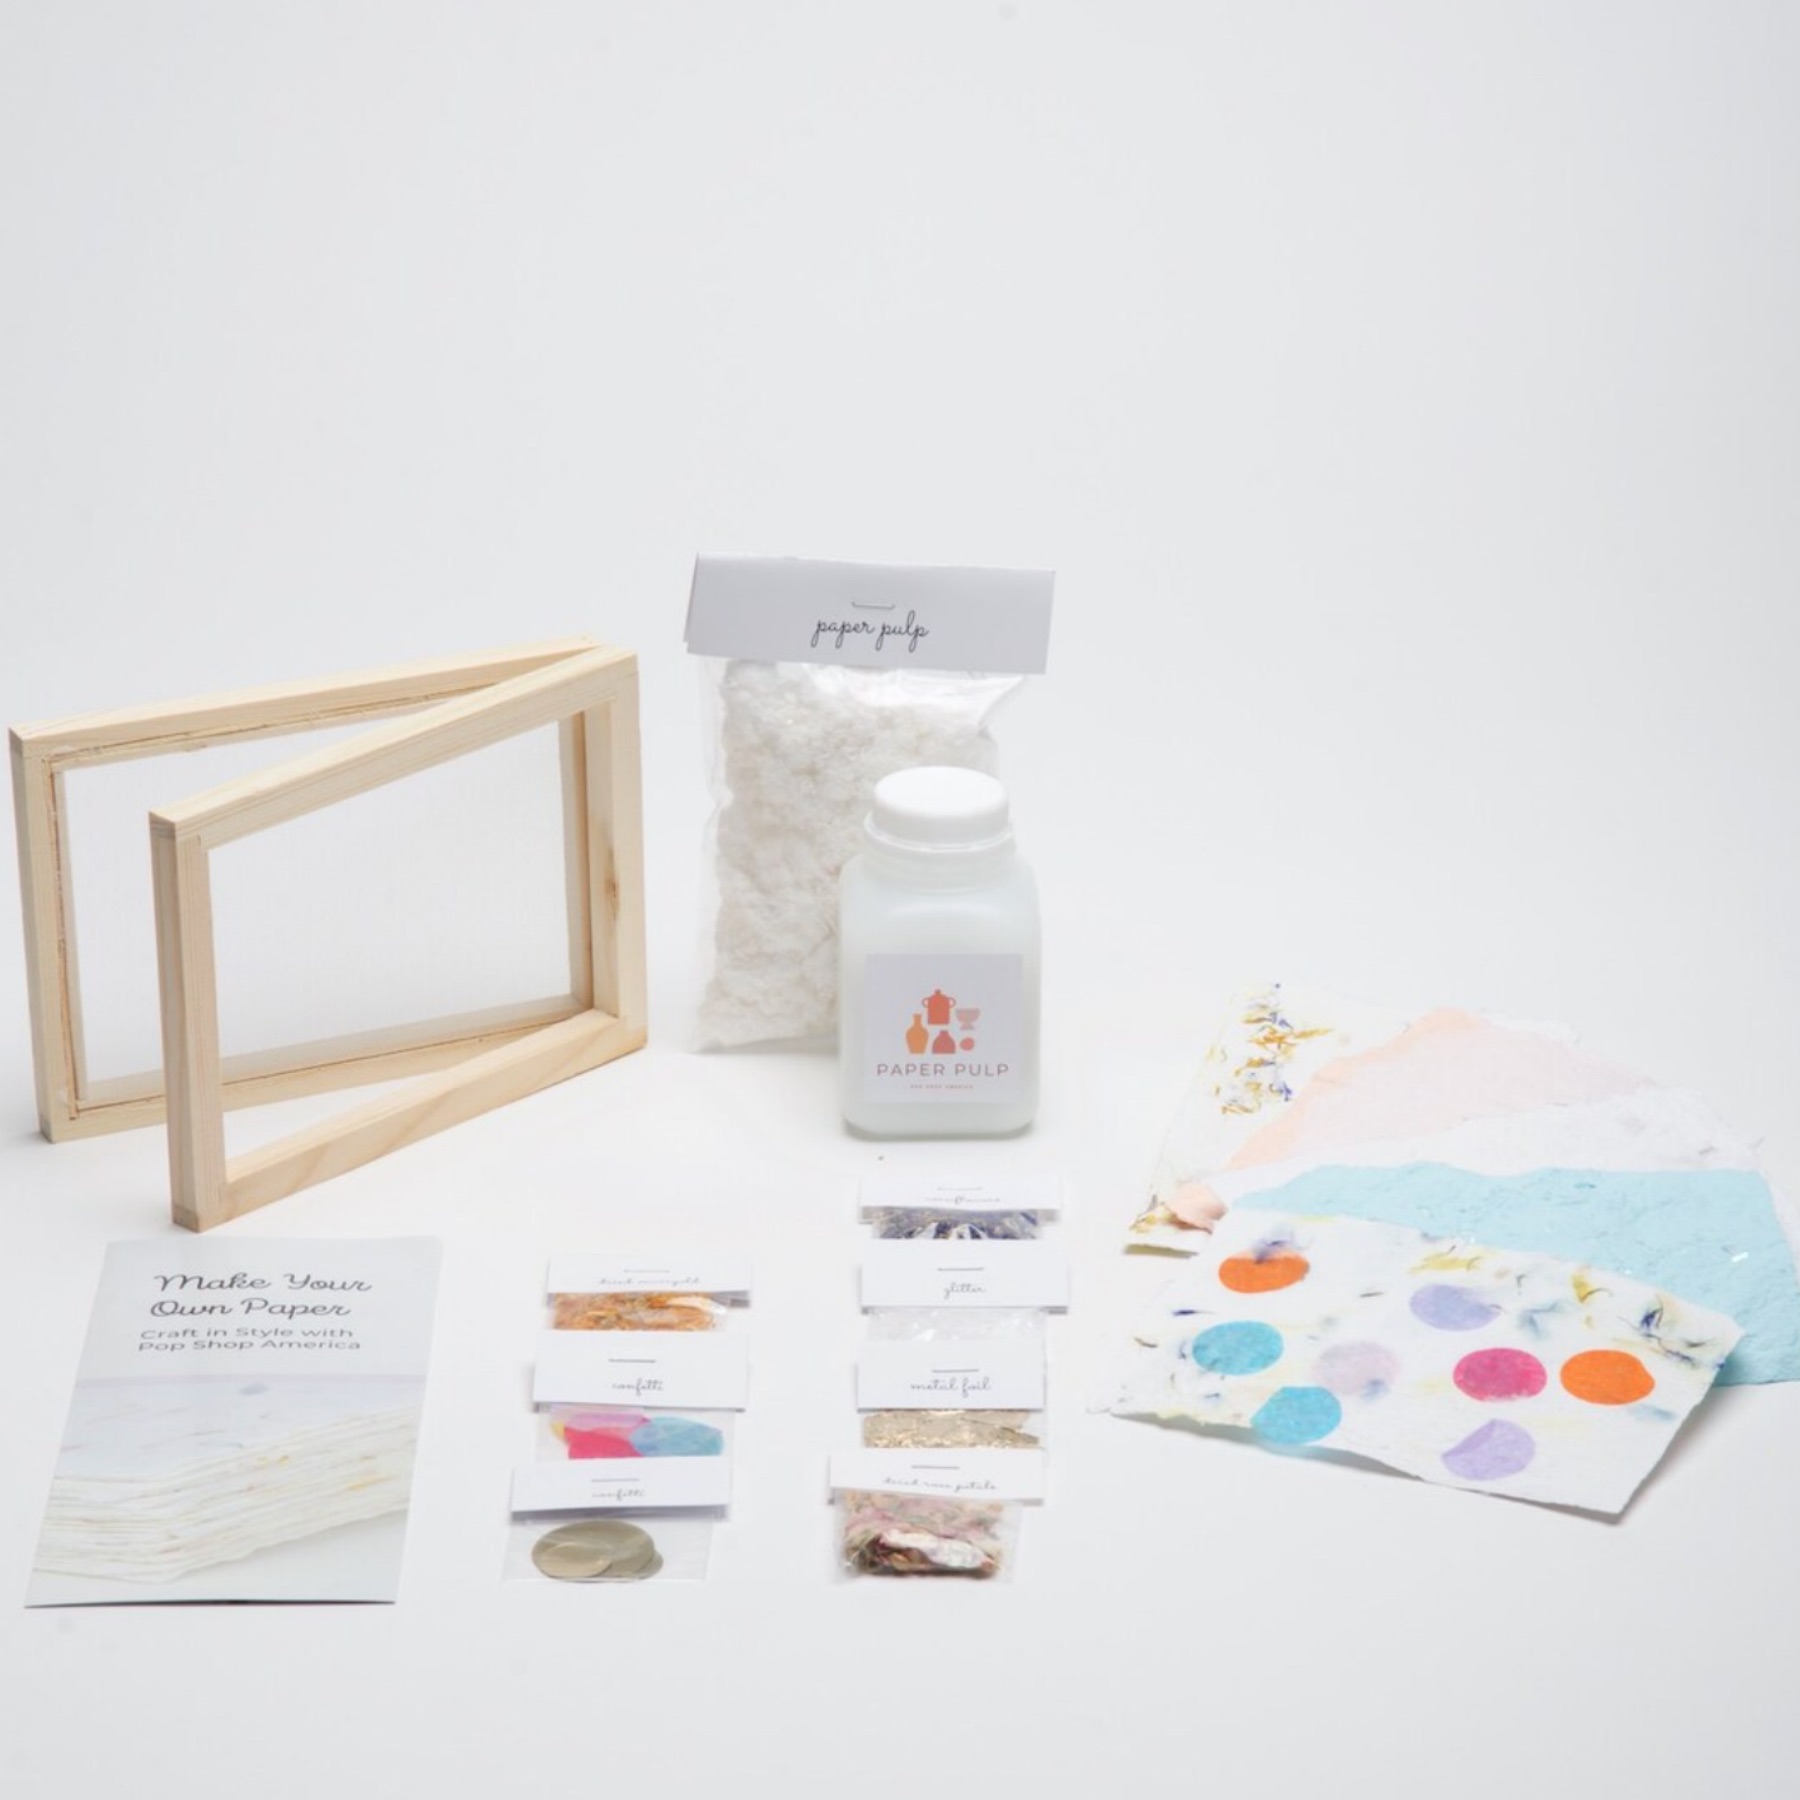 Hello Hobby Paper Making Kit, 32 Pieces